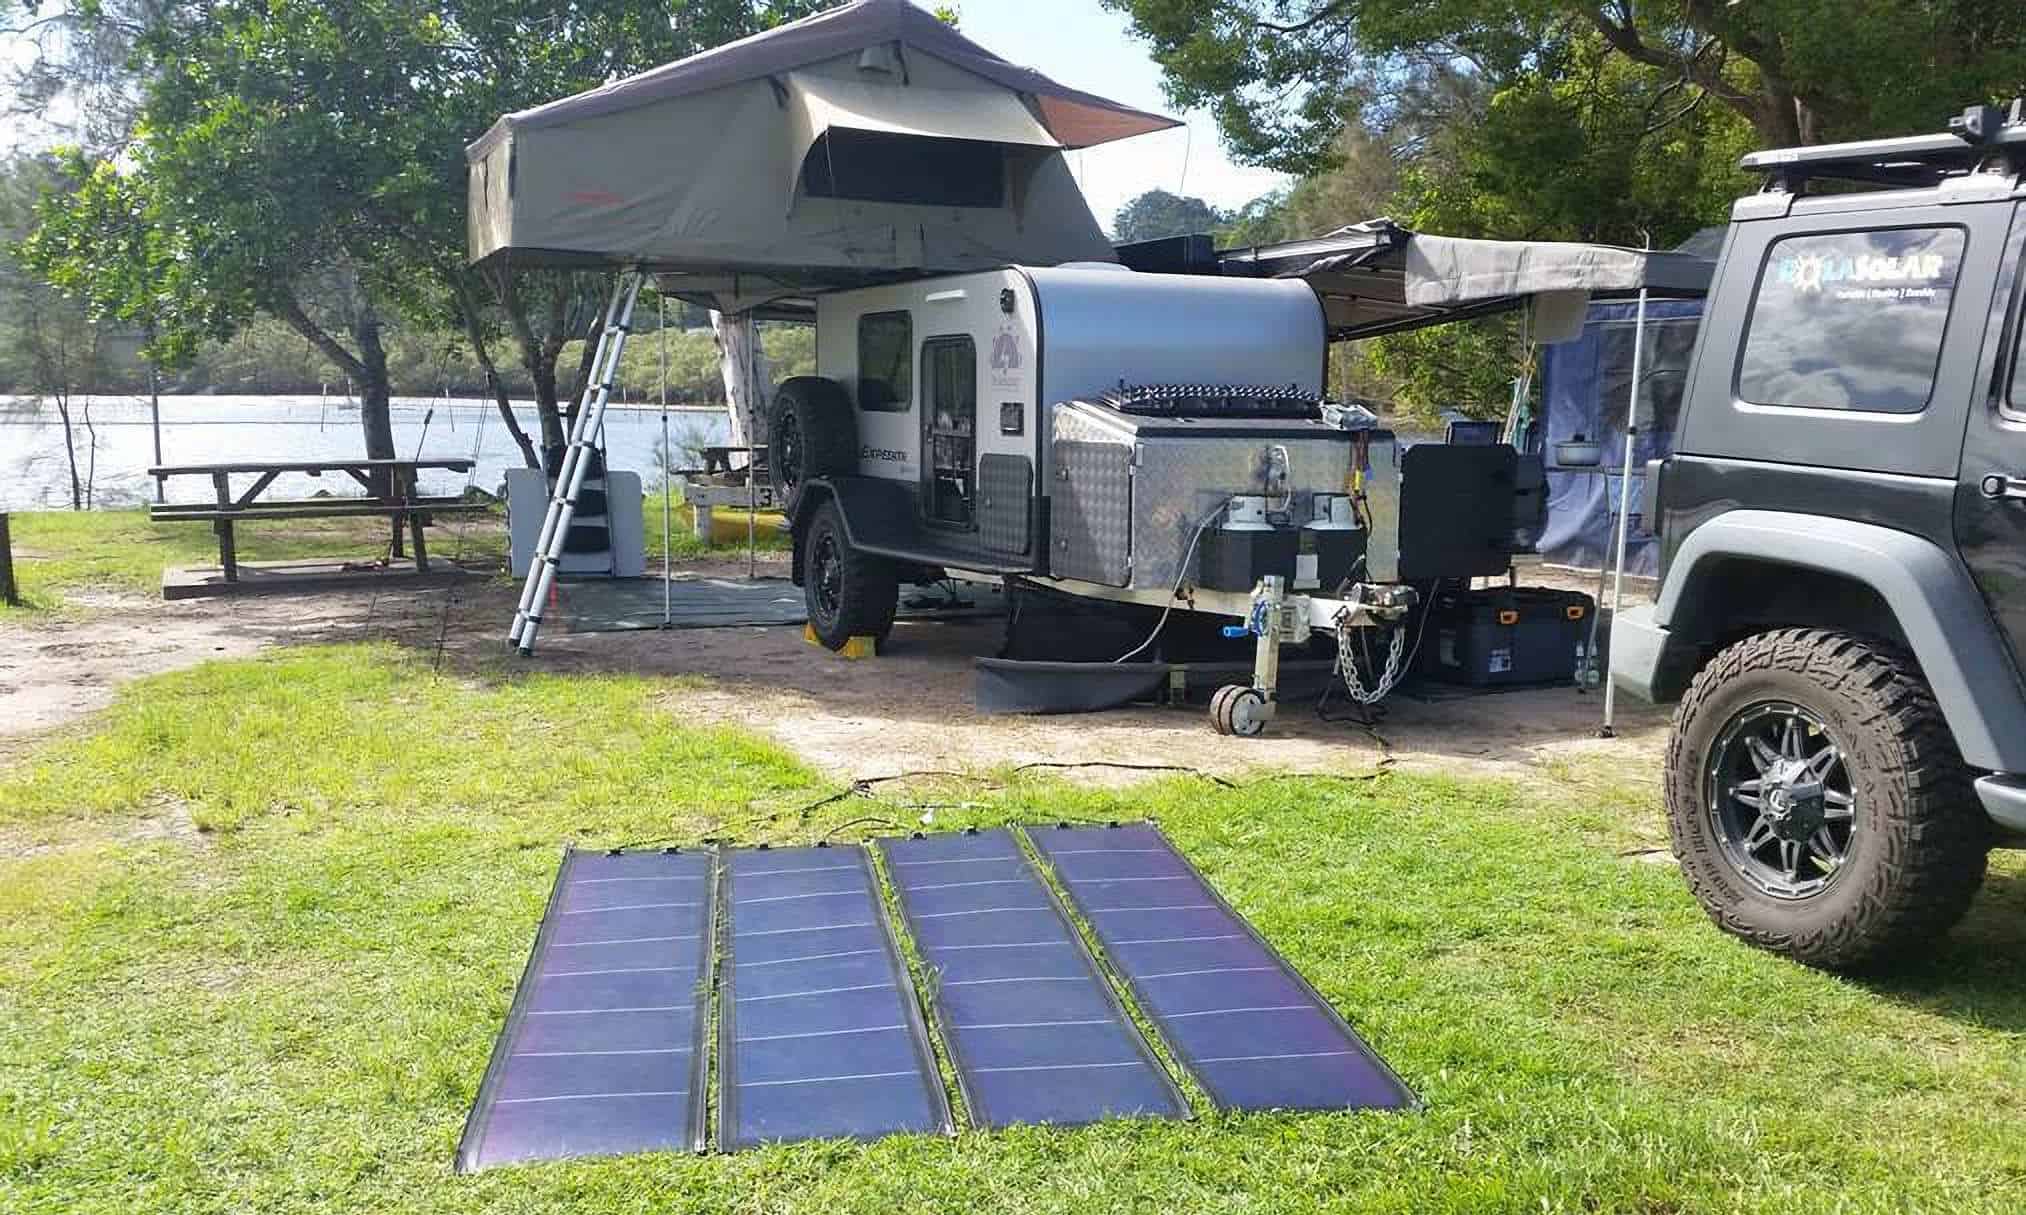 10 Best Solar Panels for Camping 2022 - Portable Solar Panel Reviews